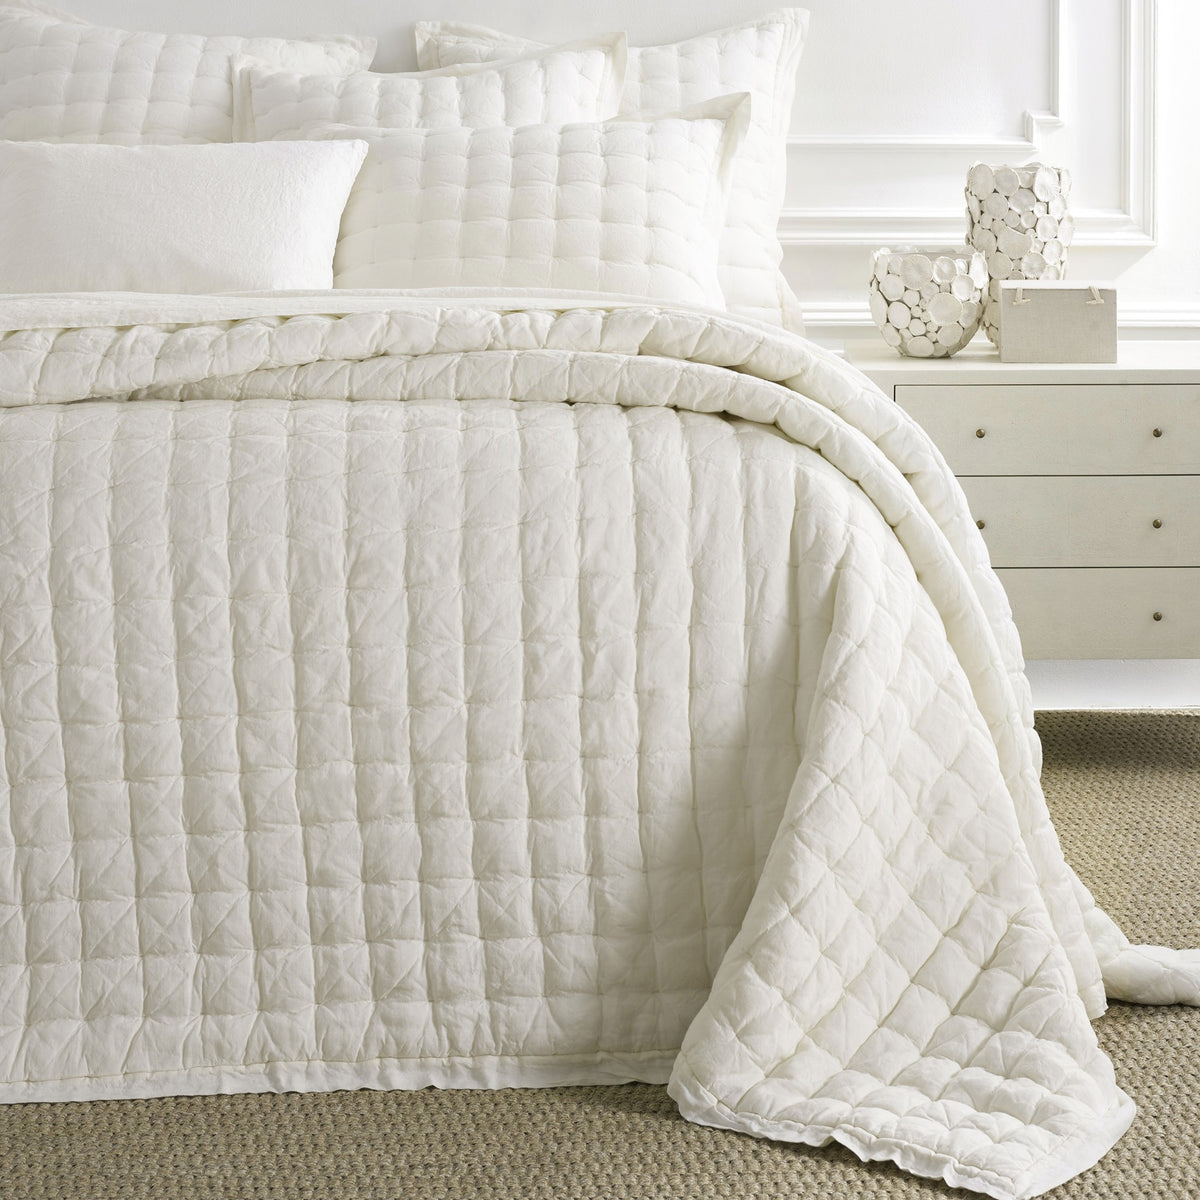 Bed Dressed in Pine Cone Hill Lush Linen Puff in Color Ivory